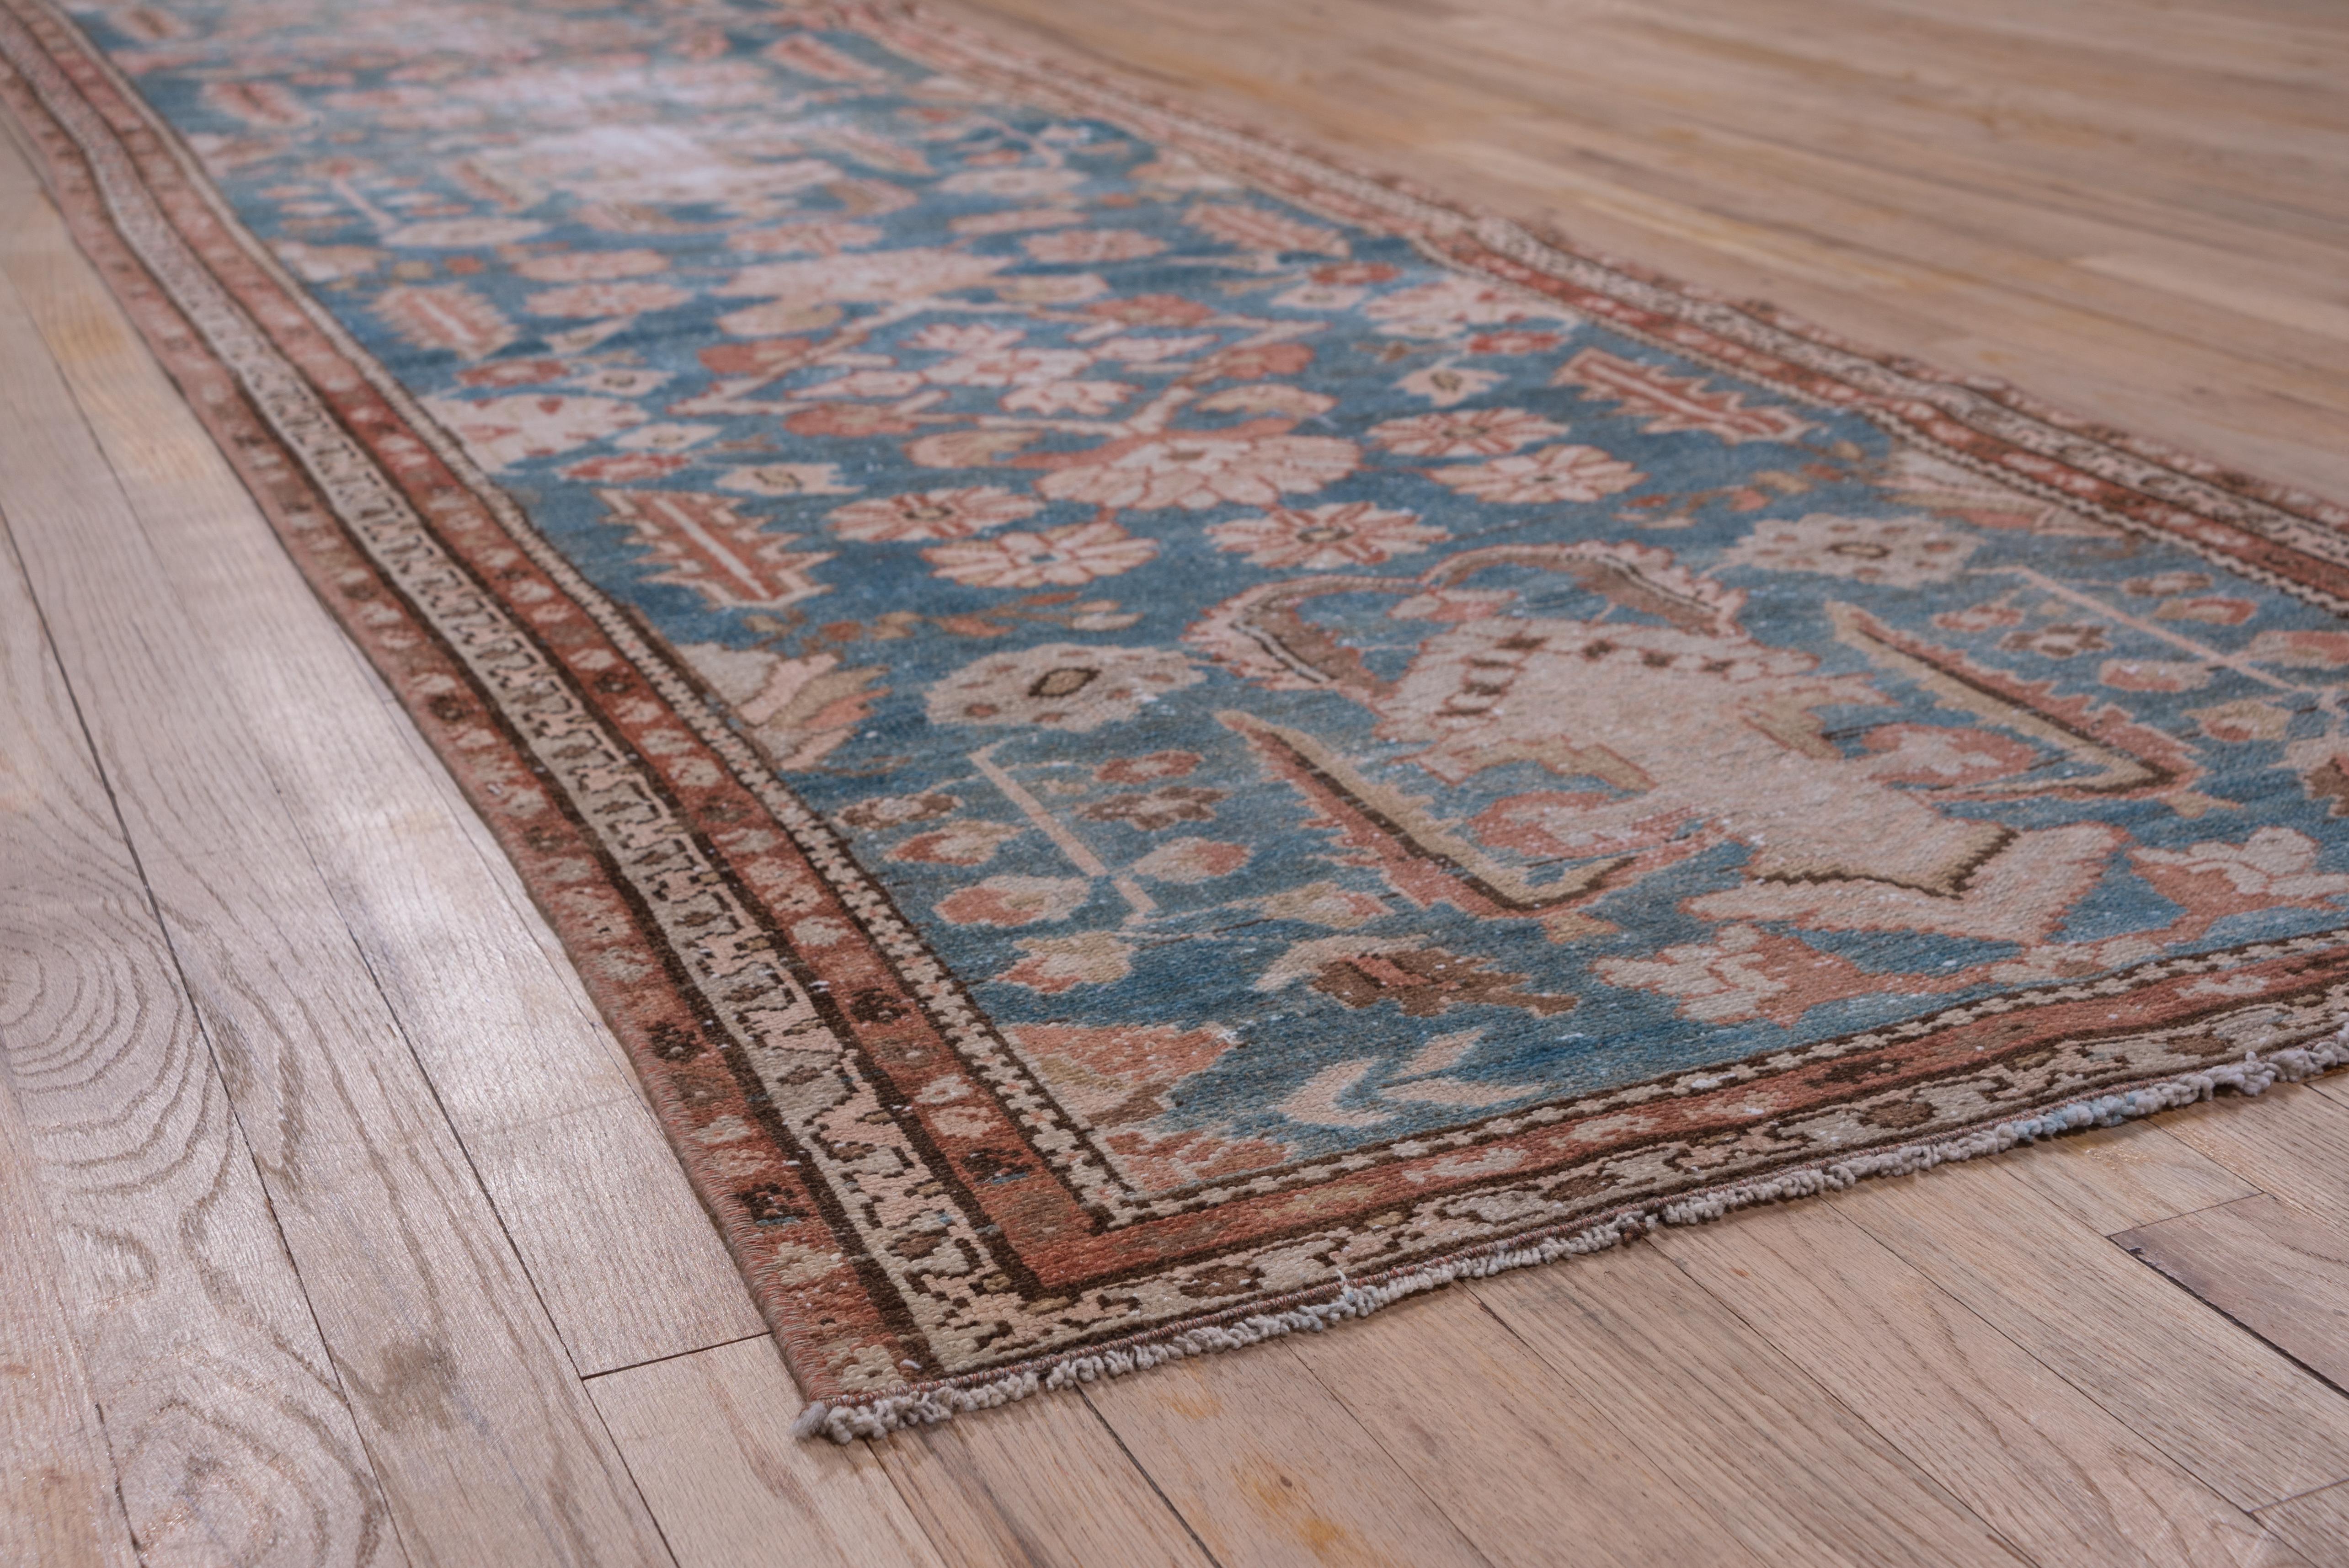 This west Persian runner shows ivory cruciforms embraced by ragged leaves, with a background scatter of tall flowers, serrated leaves, open lozenges and smaller rosettes on a light blue-grey field. The open lozenges are in the Herati style. Rust and